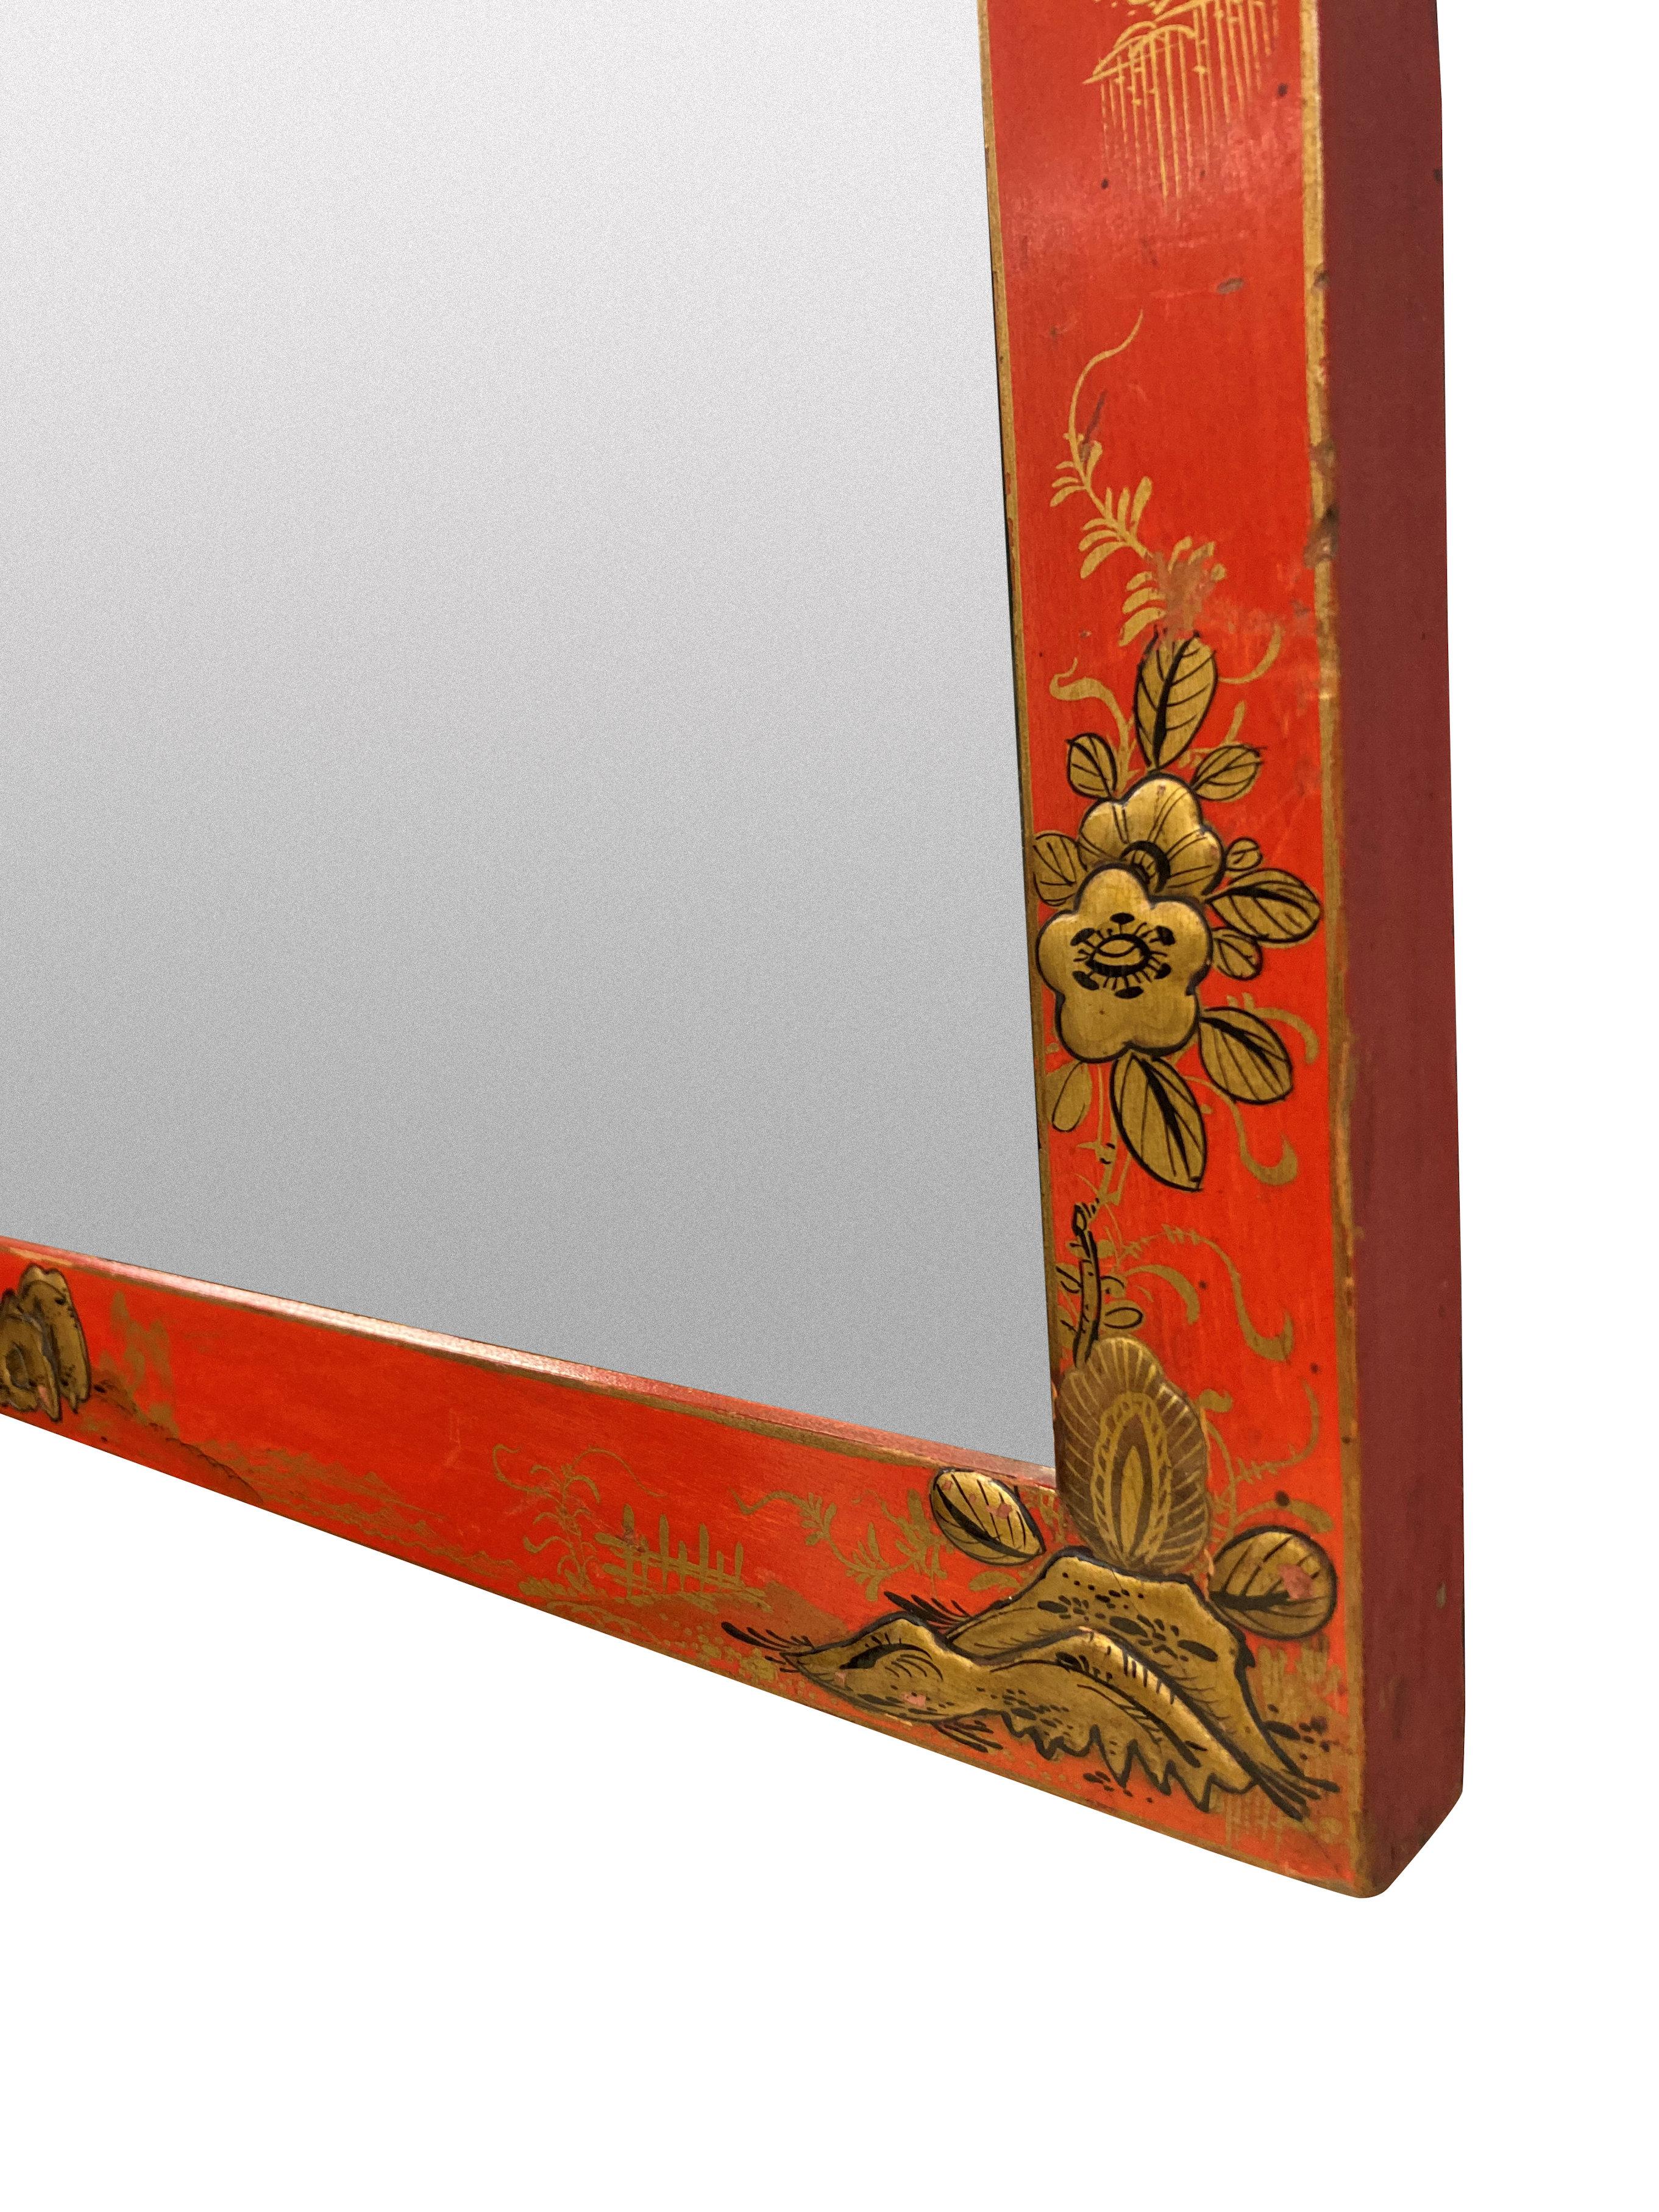 A pair of English Edwardian scarlet Japanned mirrors, each with different gold decoration. The plates are bevelled.